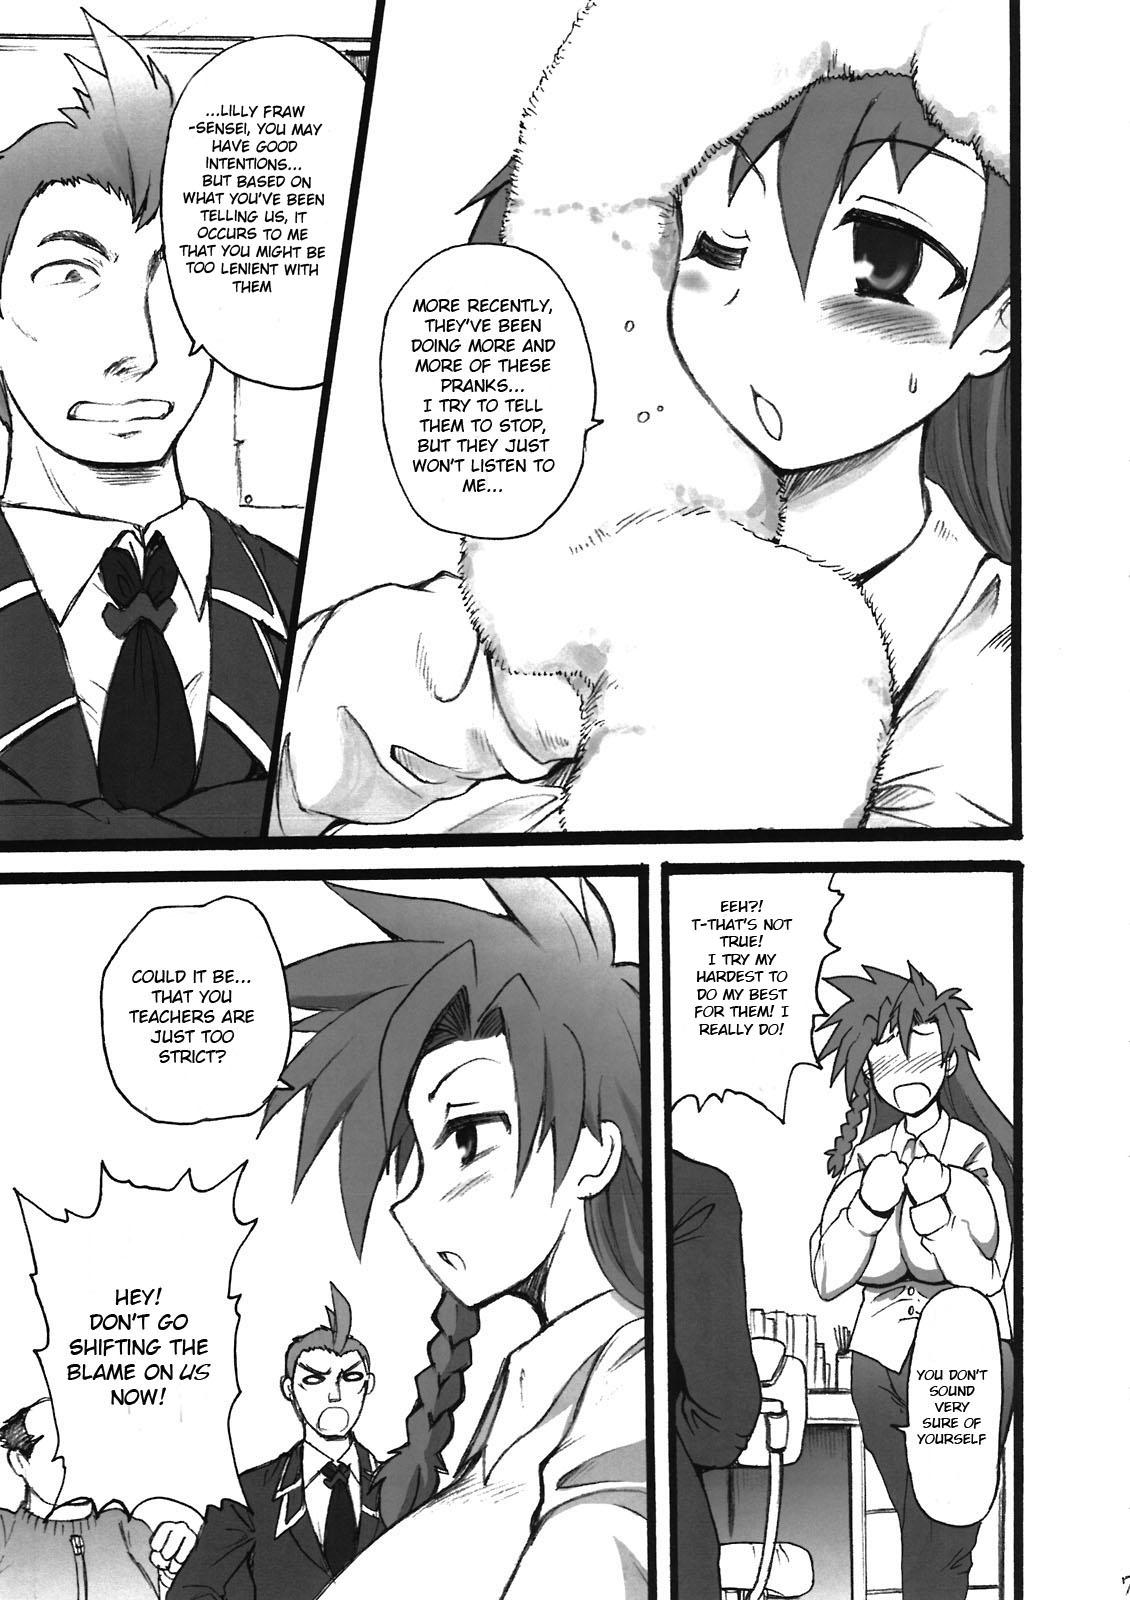 Exgirlfriend Teach me. Clothed - Page 7